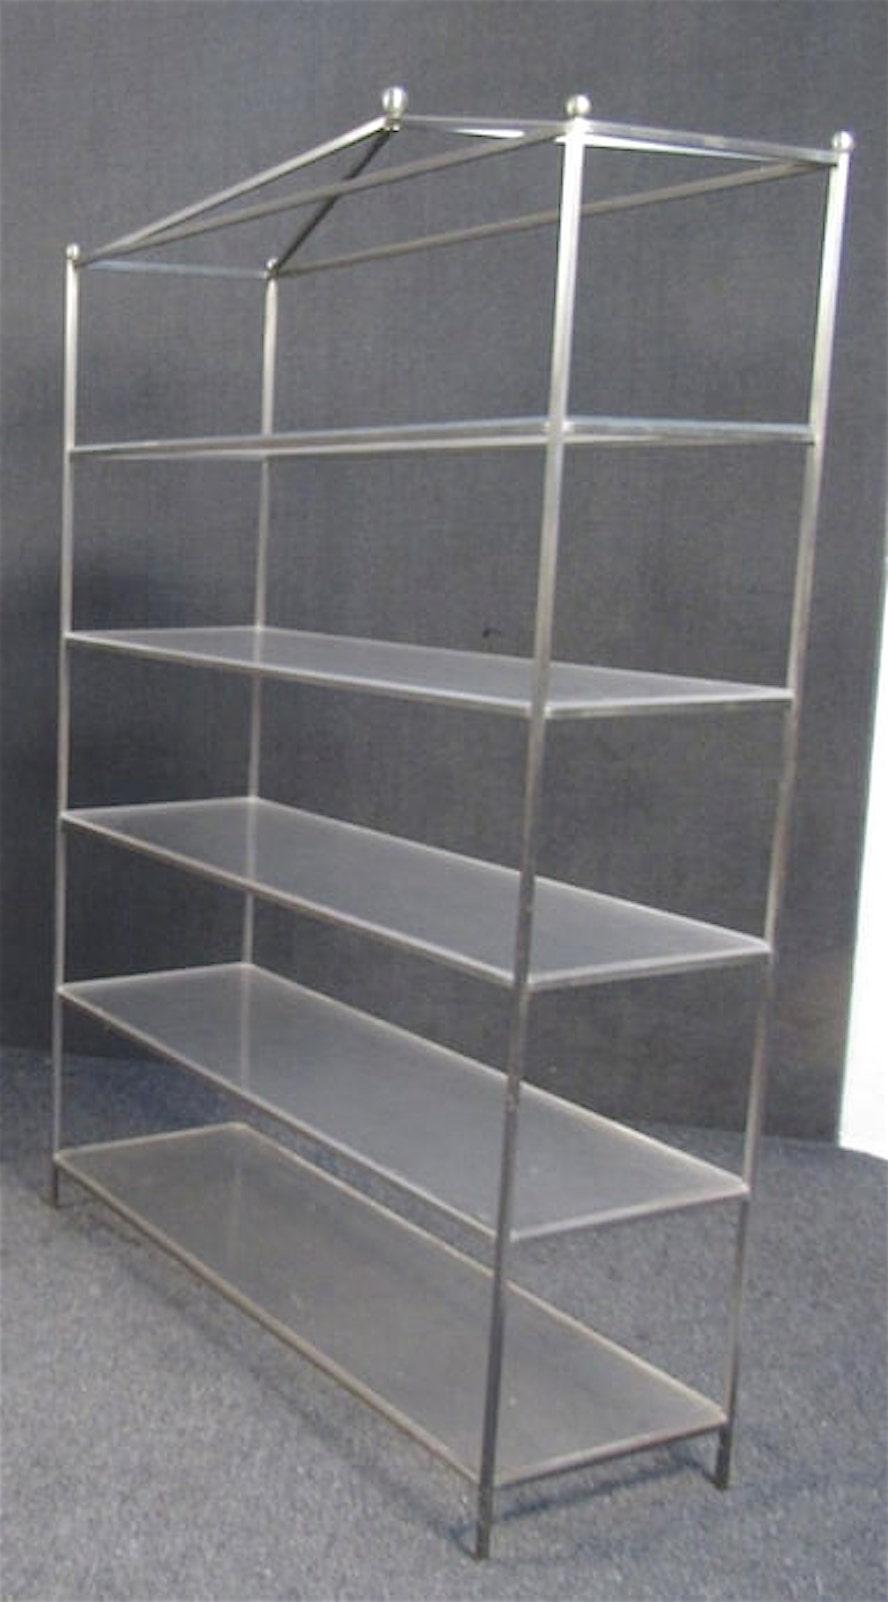 Tall metal frame bookcase with plexiglass shelves. 

Please confirm the item location (NY or NJ).